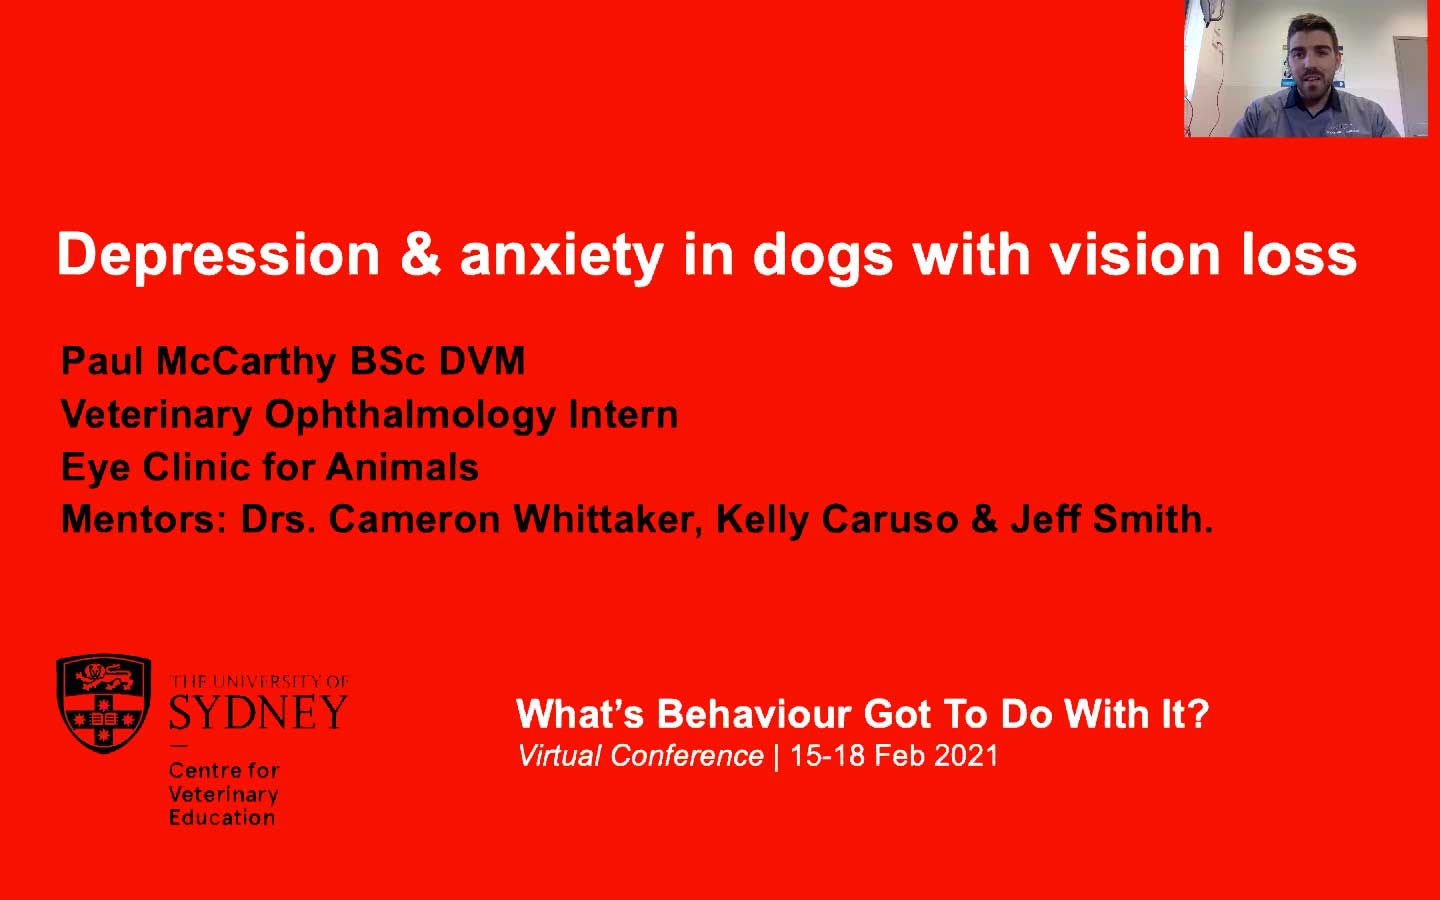 Prevalence Of Depression & Anxiety In Animals With Vision Loss